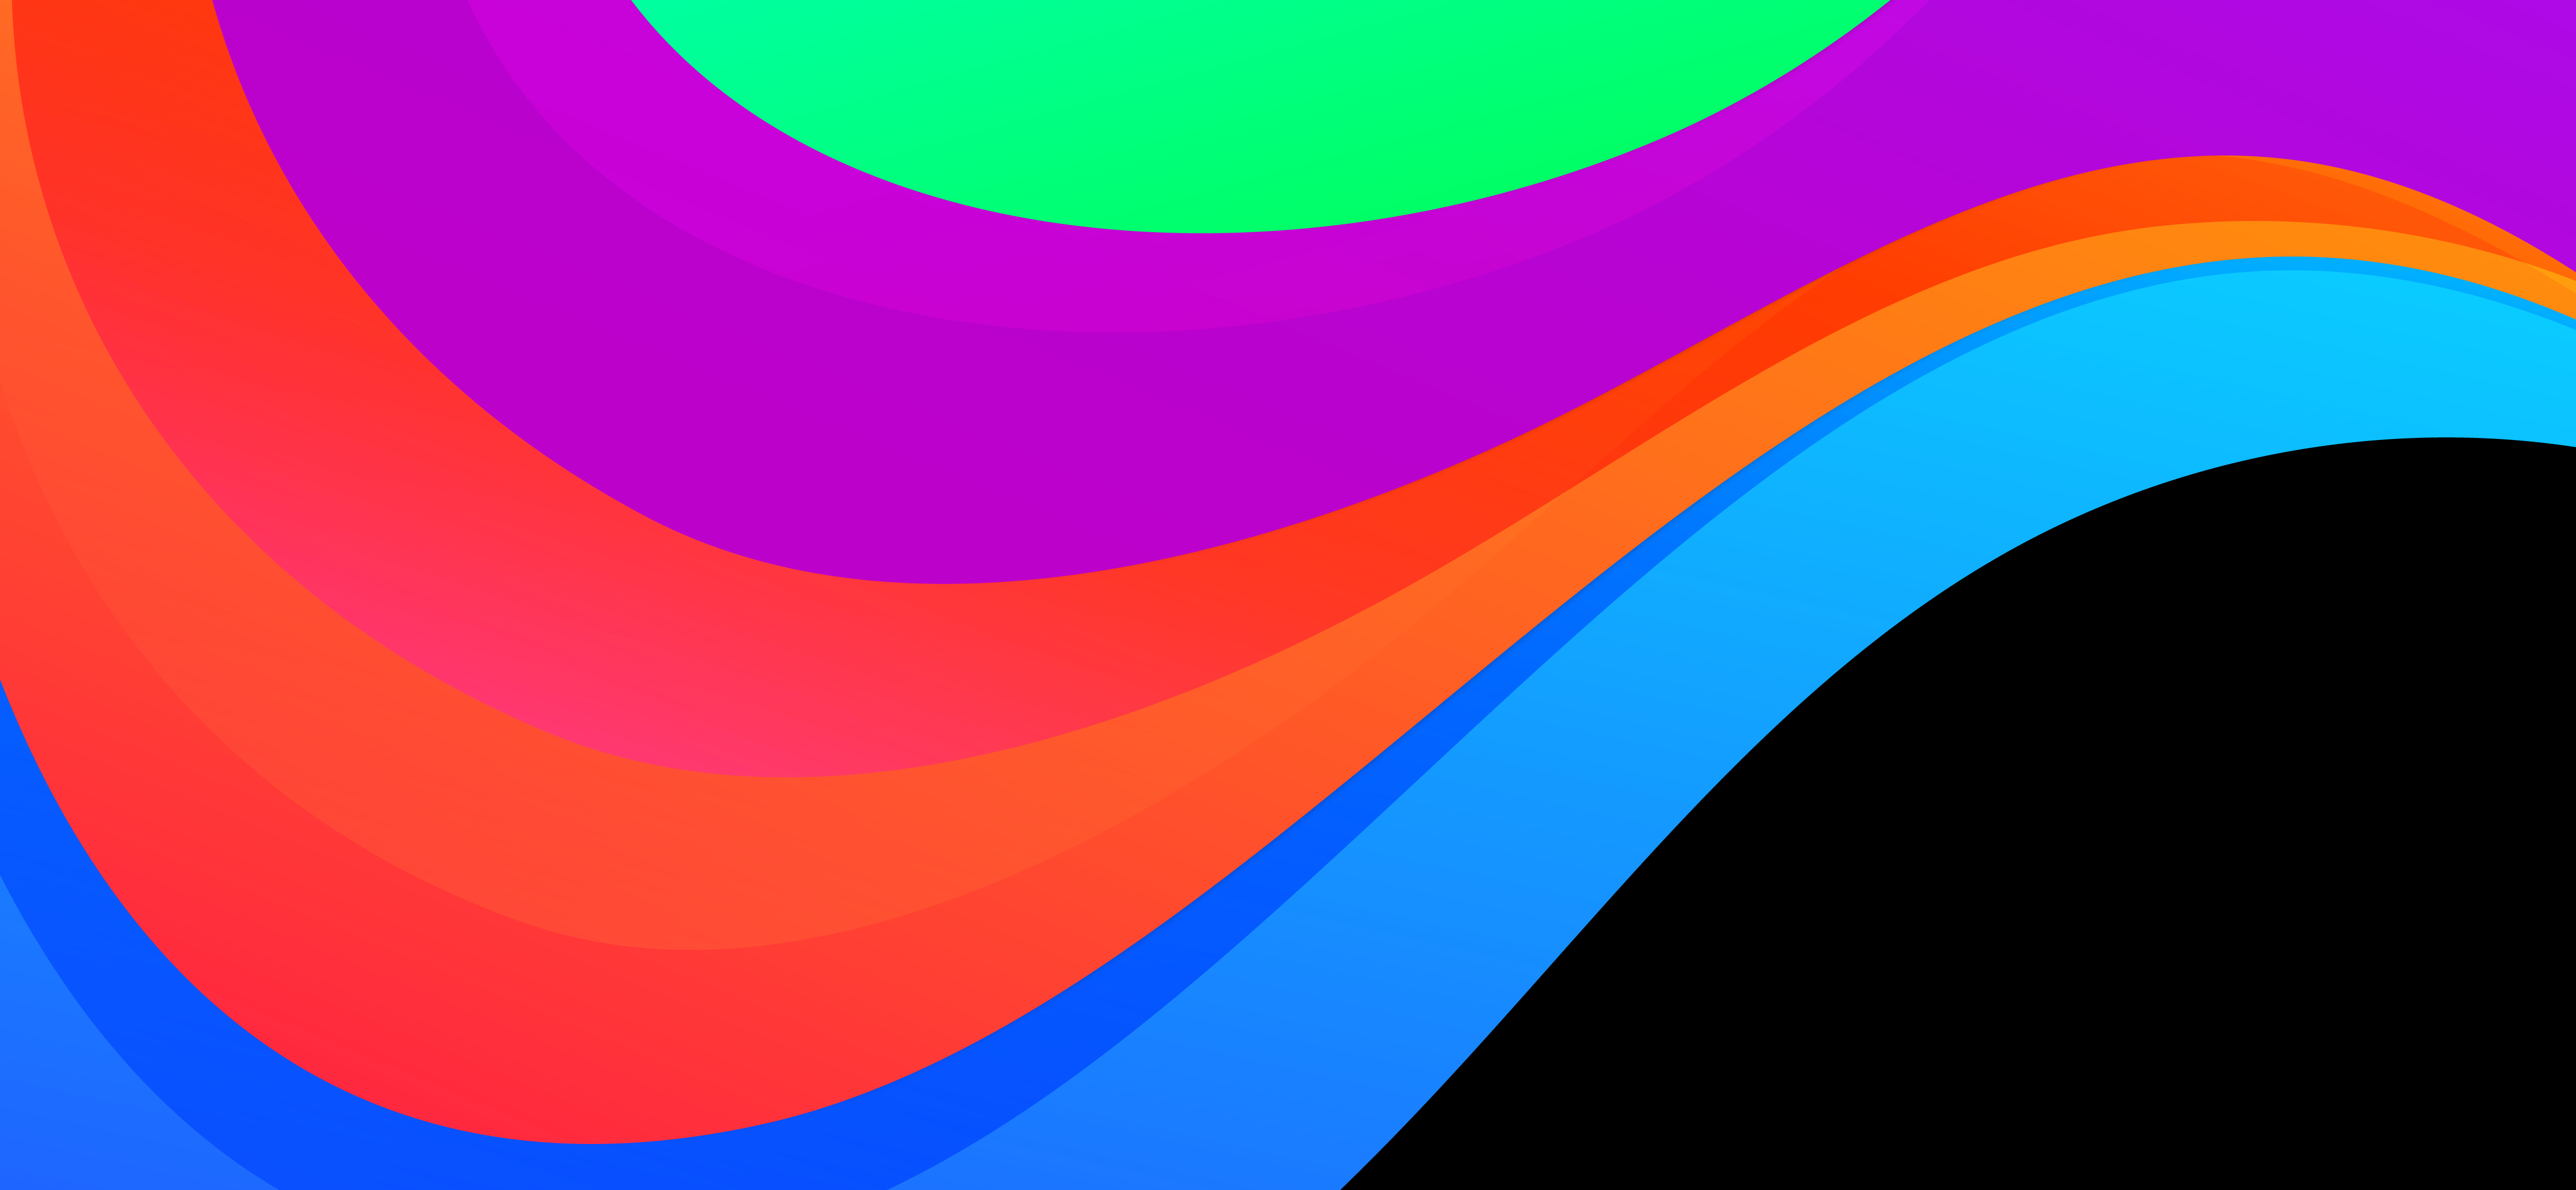 WALLPAPER 4K - COLORFUL SIMPLE DESIGN - FOR PC